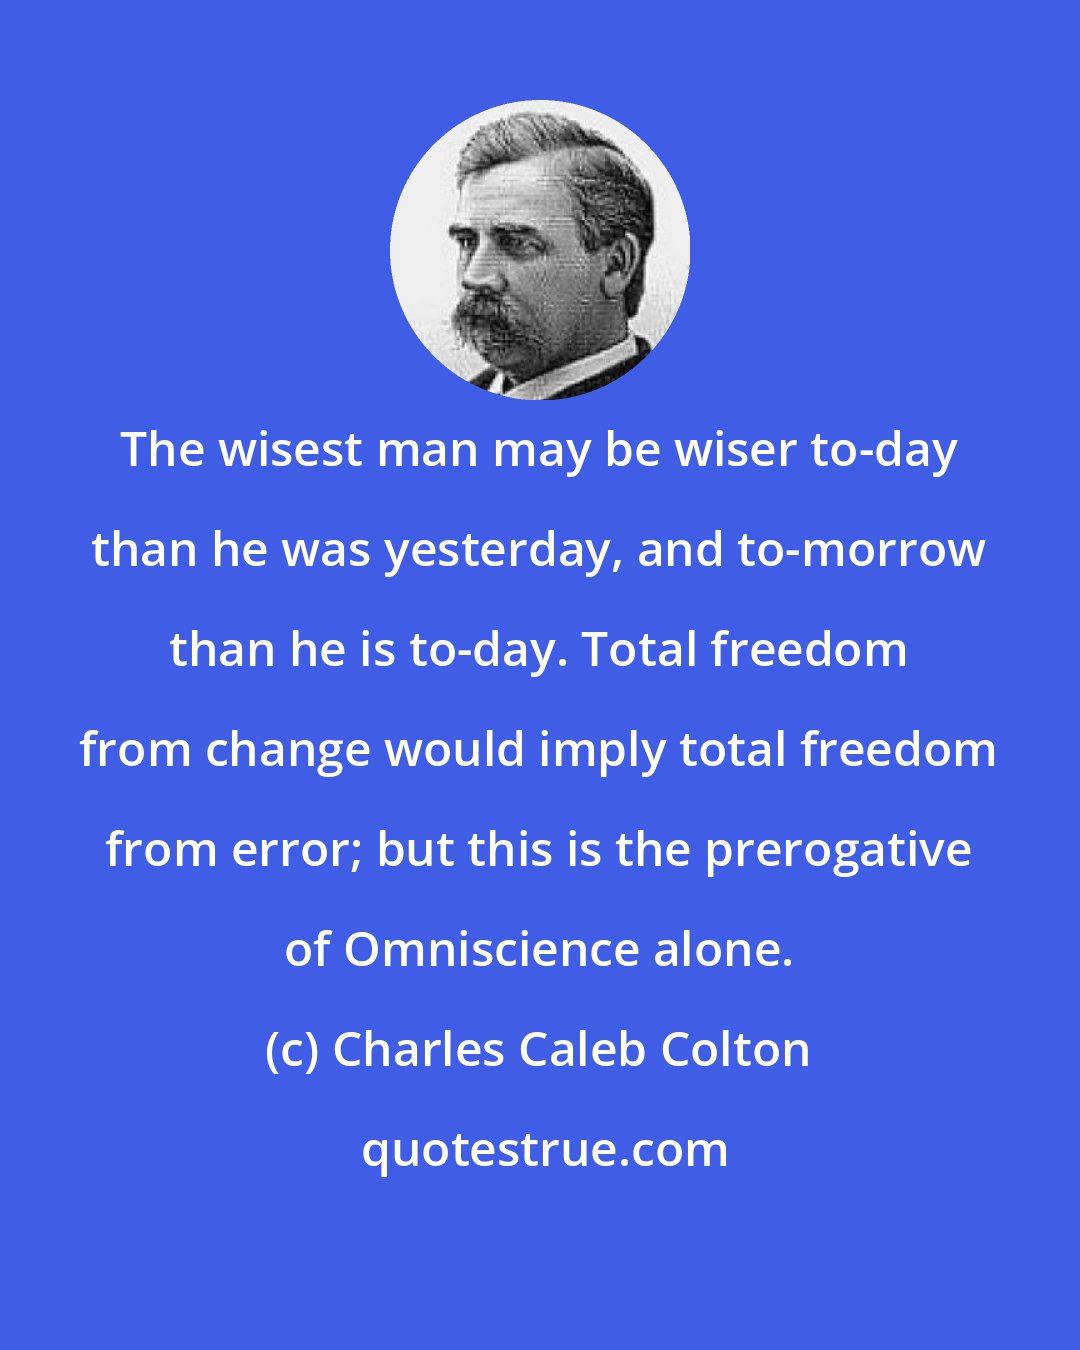 Charles Caleb Colton: The wisest man may be wiser to-day than he was yesterday, and to-morrow than he is to-day. Total freedom from change would imply total freedom from error; but this is the prerogative of Omniscience alone.